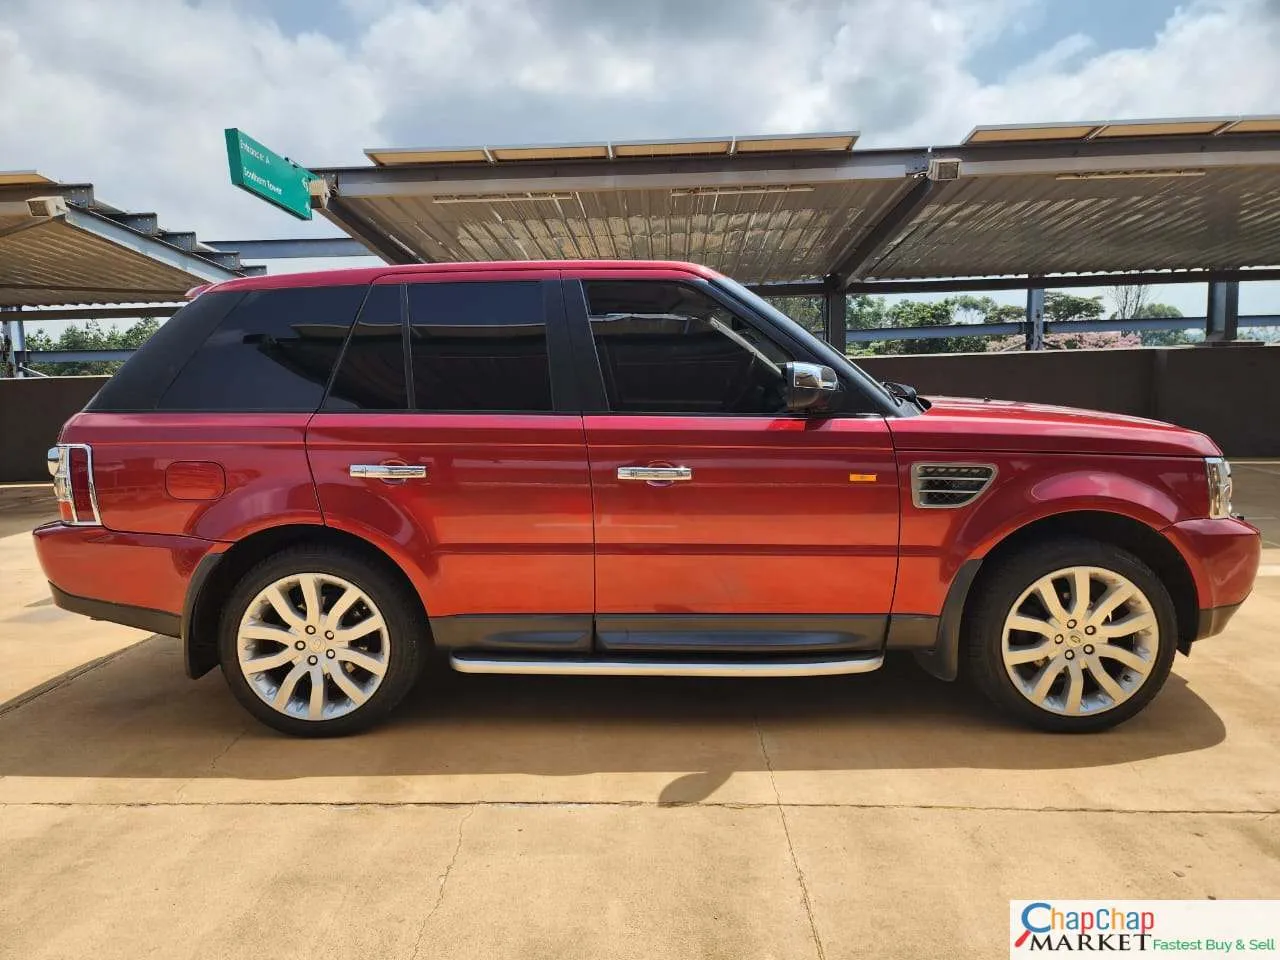 Cars Cars For Sale-Range Rover Sport for sale in Kenya HSE QUICK SALE You pay 30% deposit Trade in OK EXCLUSIVE hire purchase installments 9